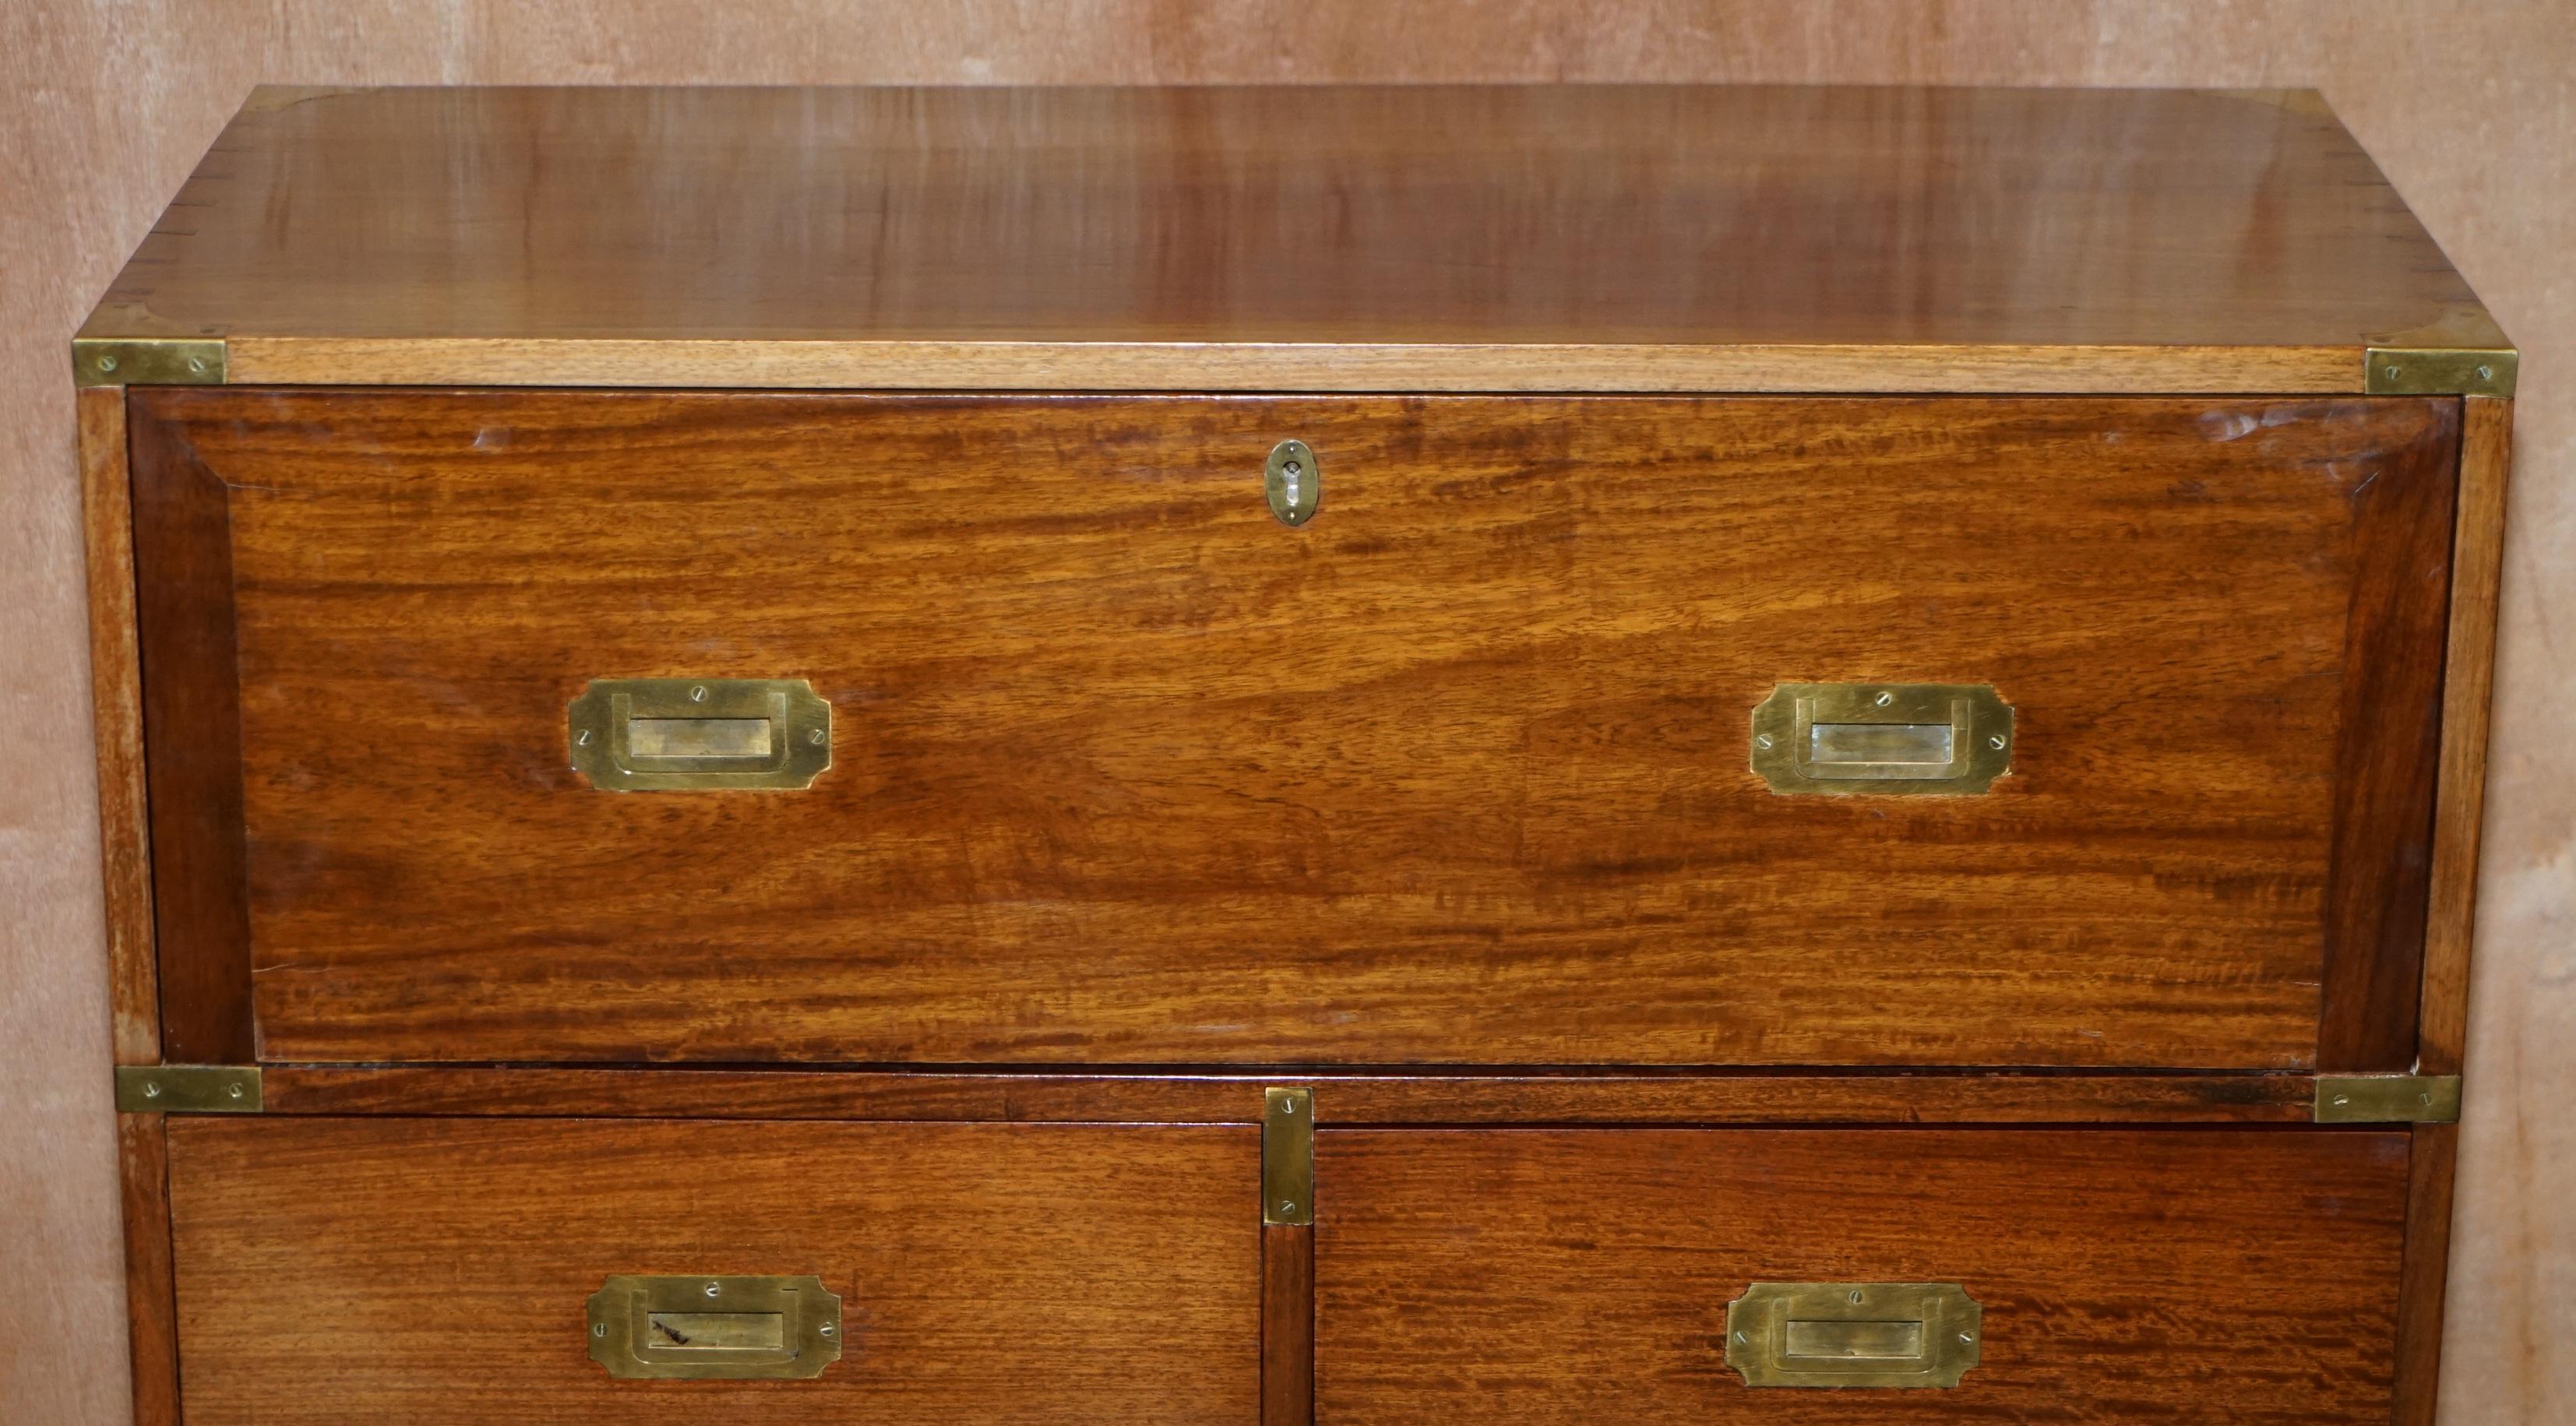 Hand-Crafted Original Charlotte Horstmann Hong Kong Military Campaign Chest of Drawers Desk